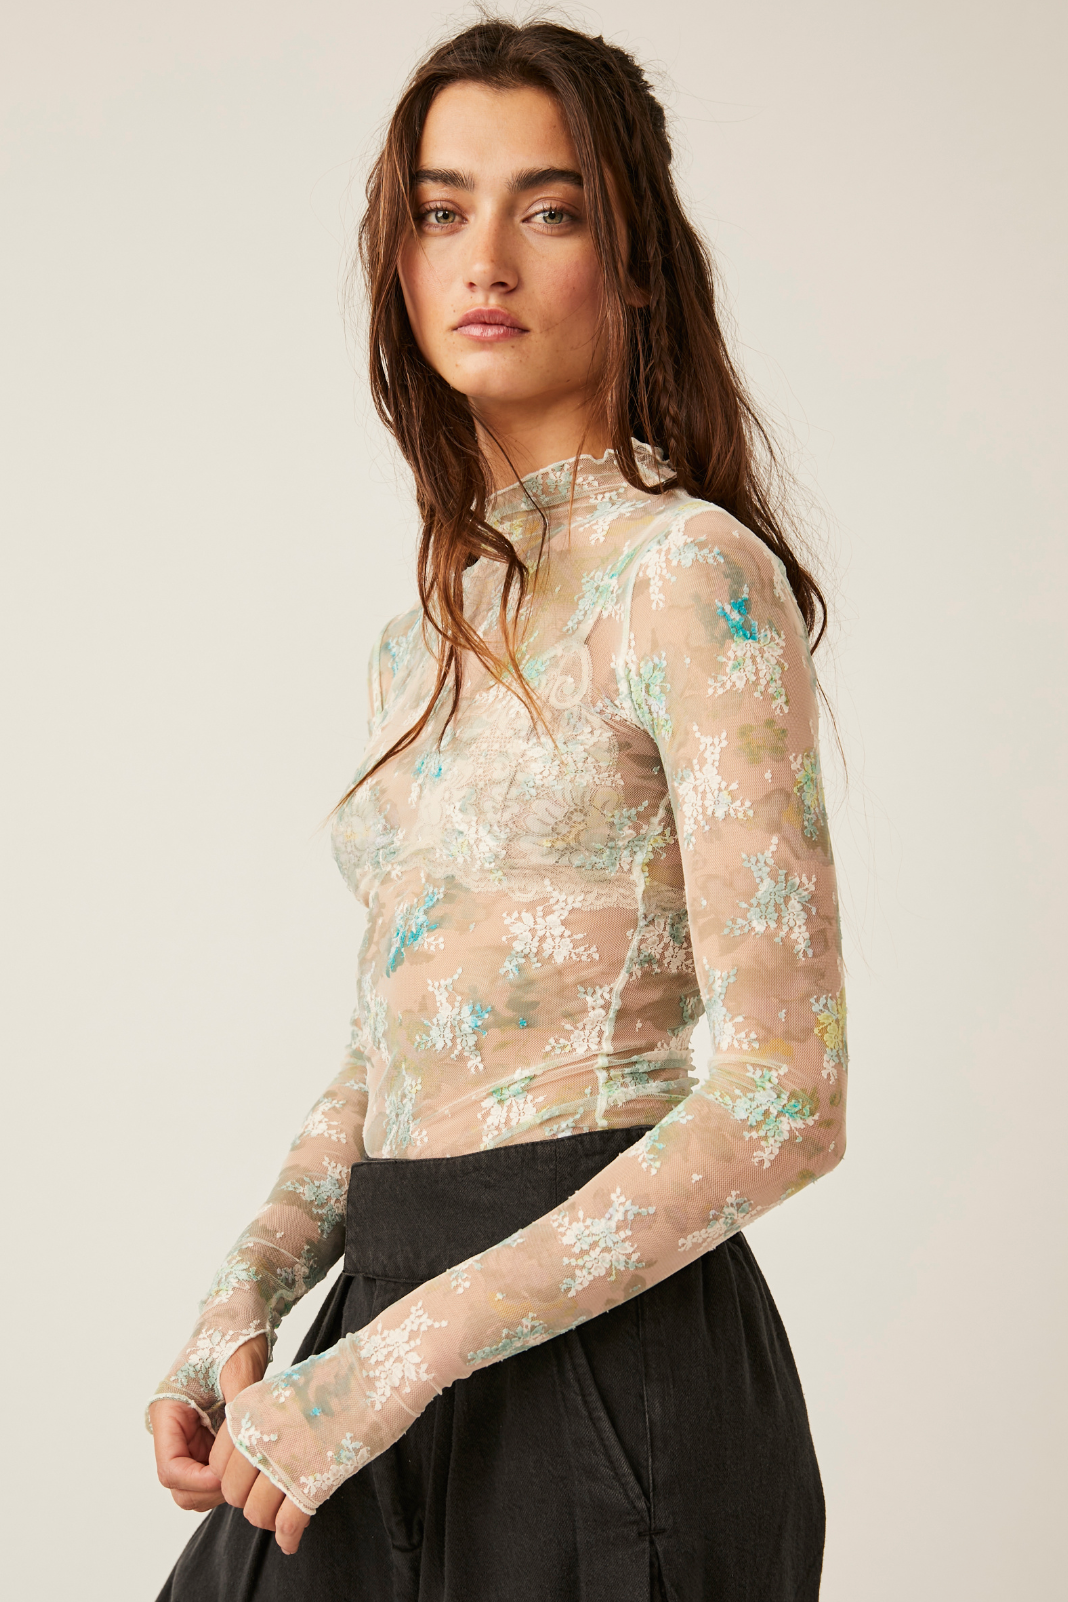 Printed Lady Lux Layering Top